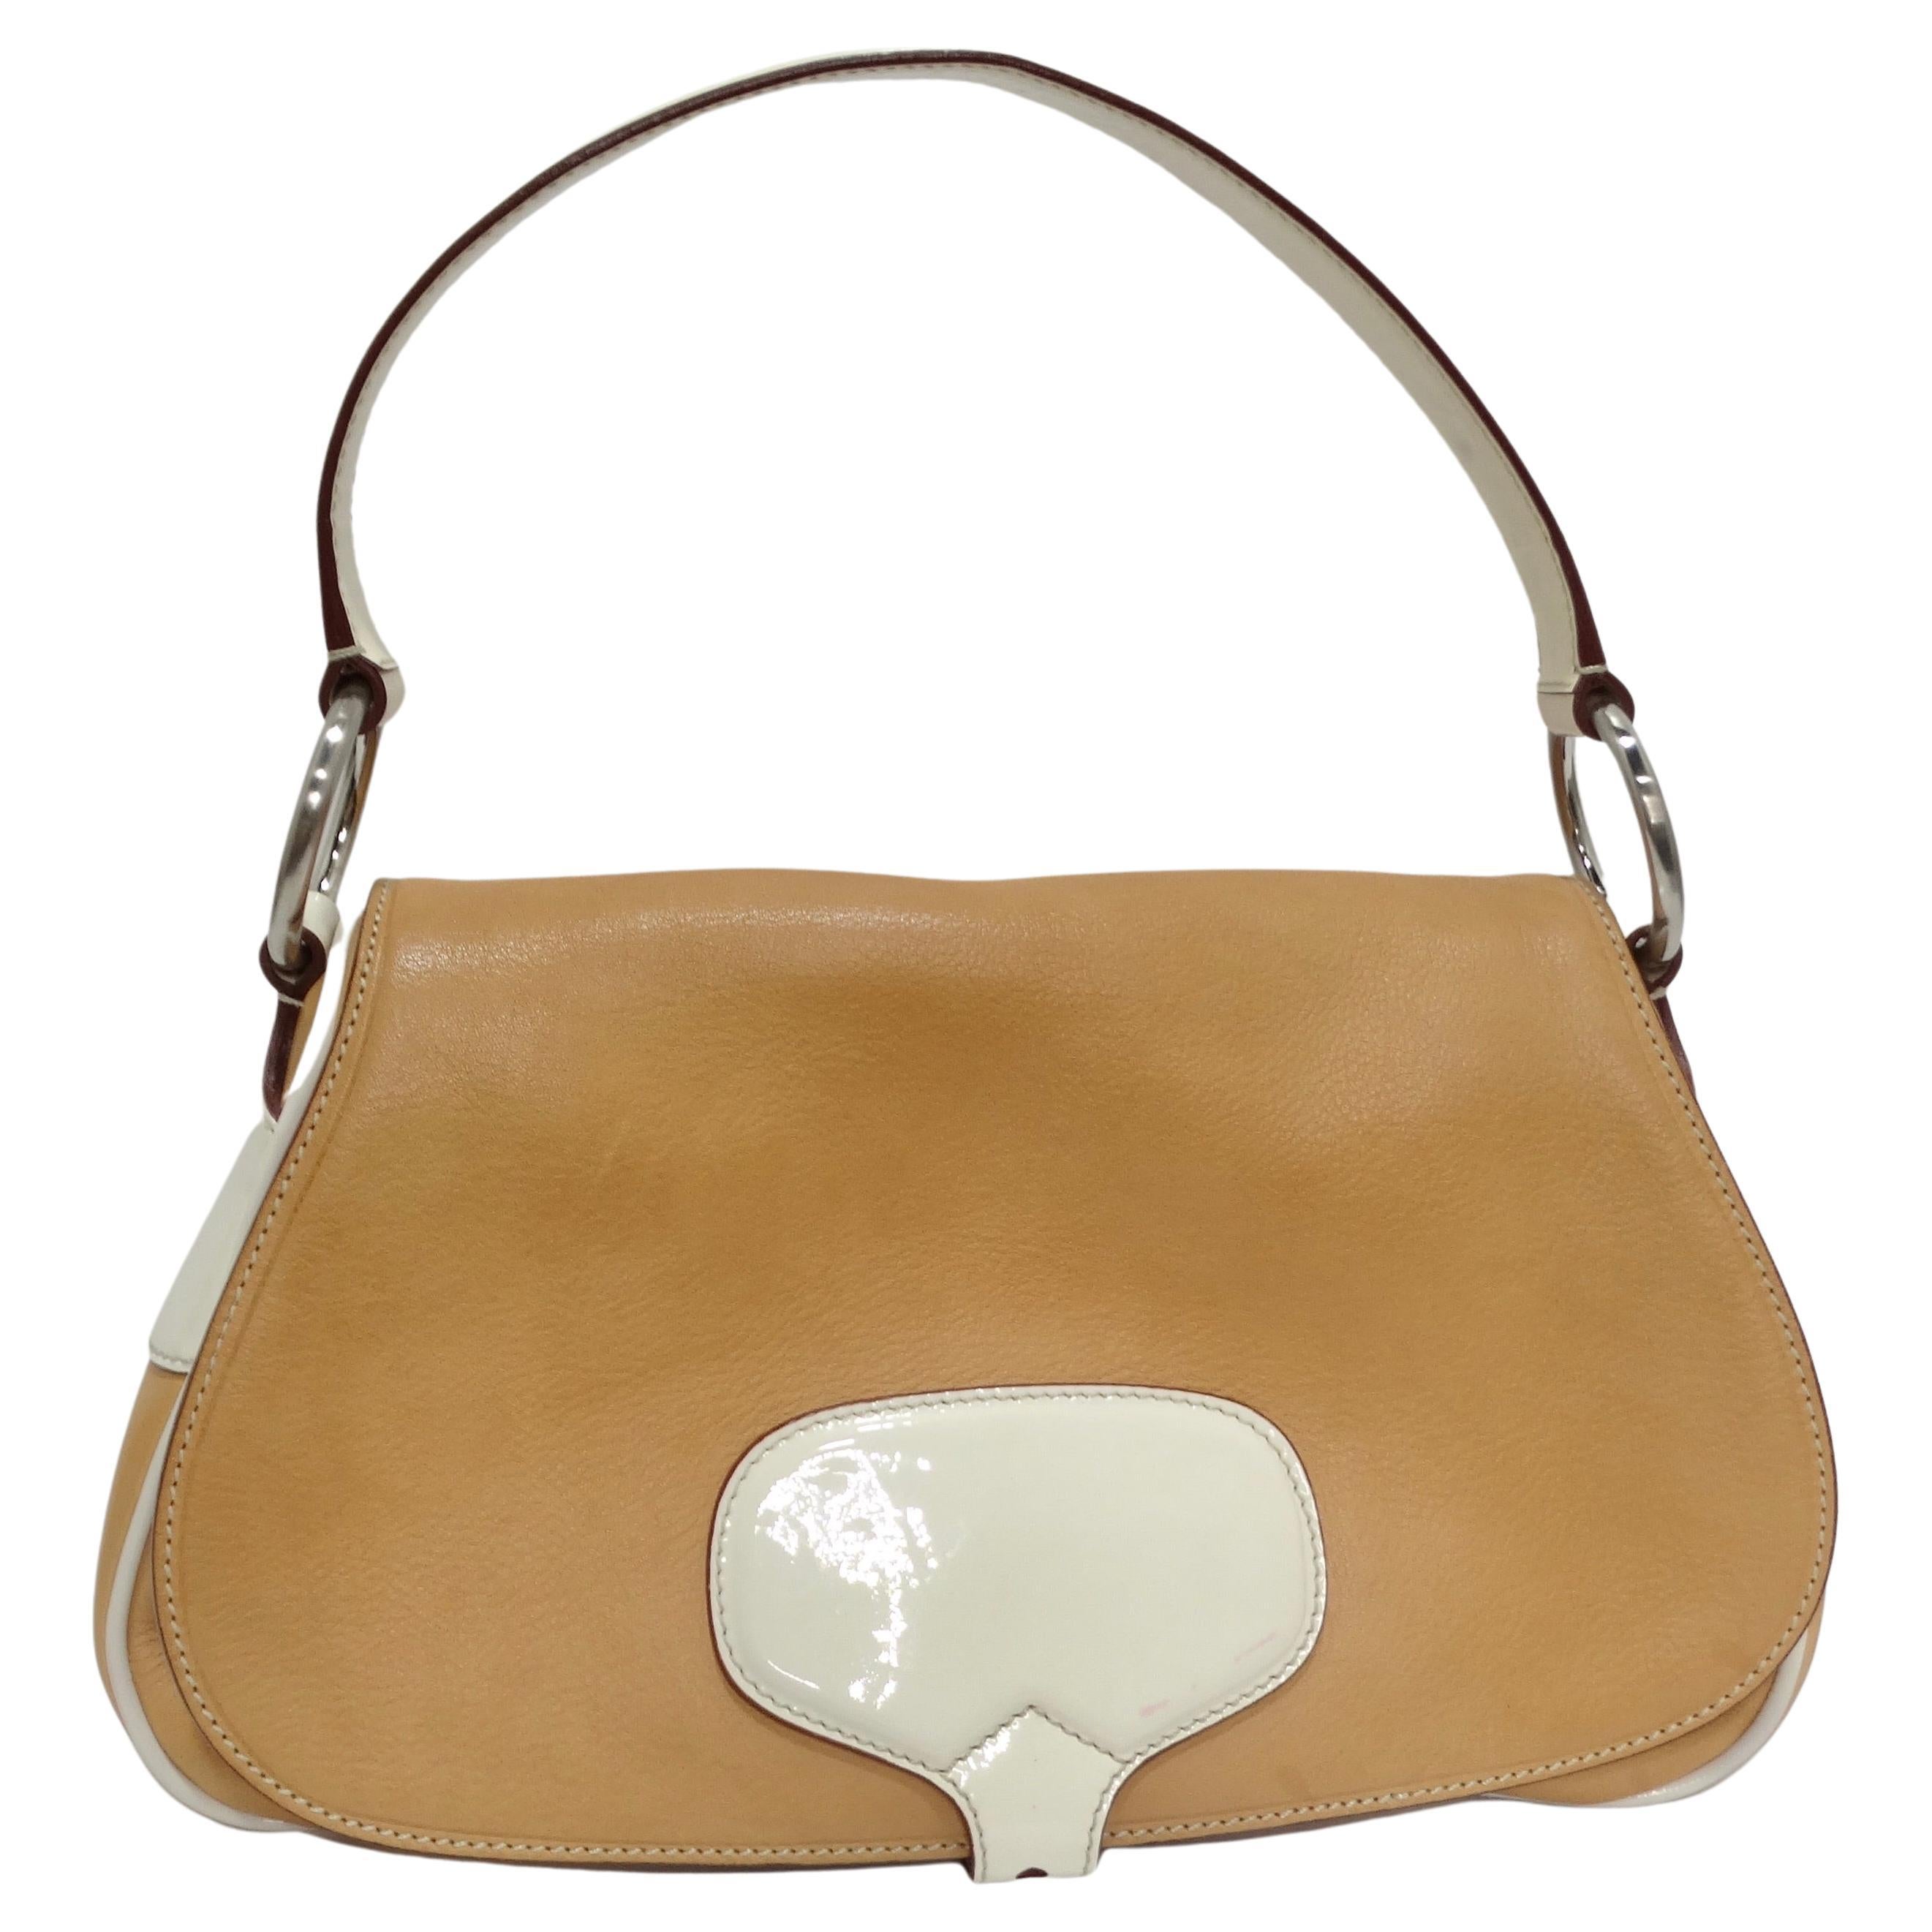 Prada 2000s Camel Leather Top Handle Bag For Sale